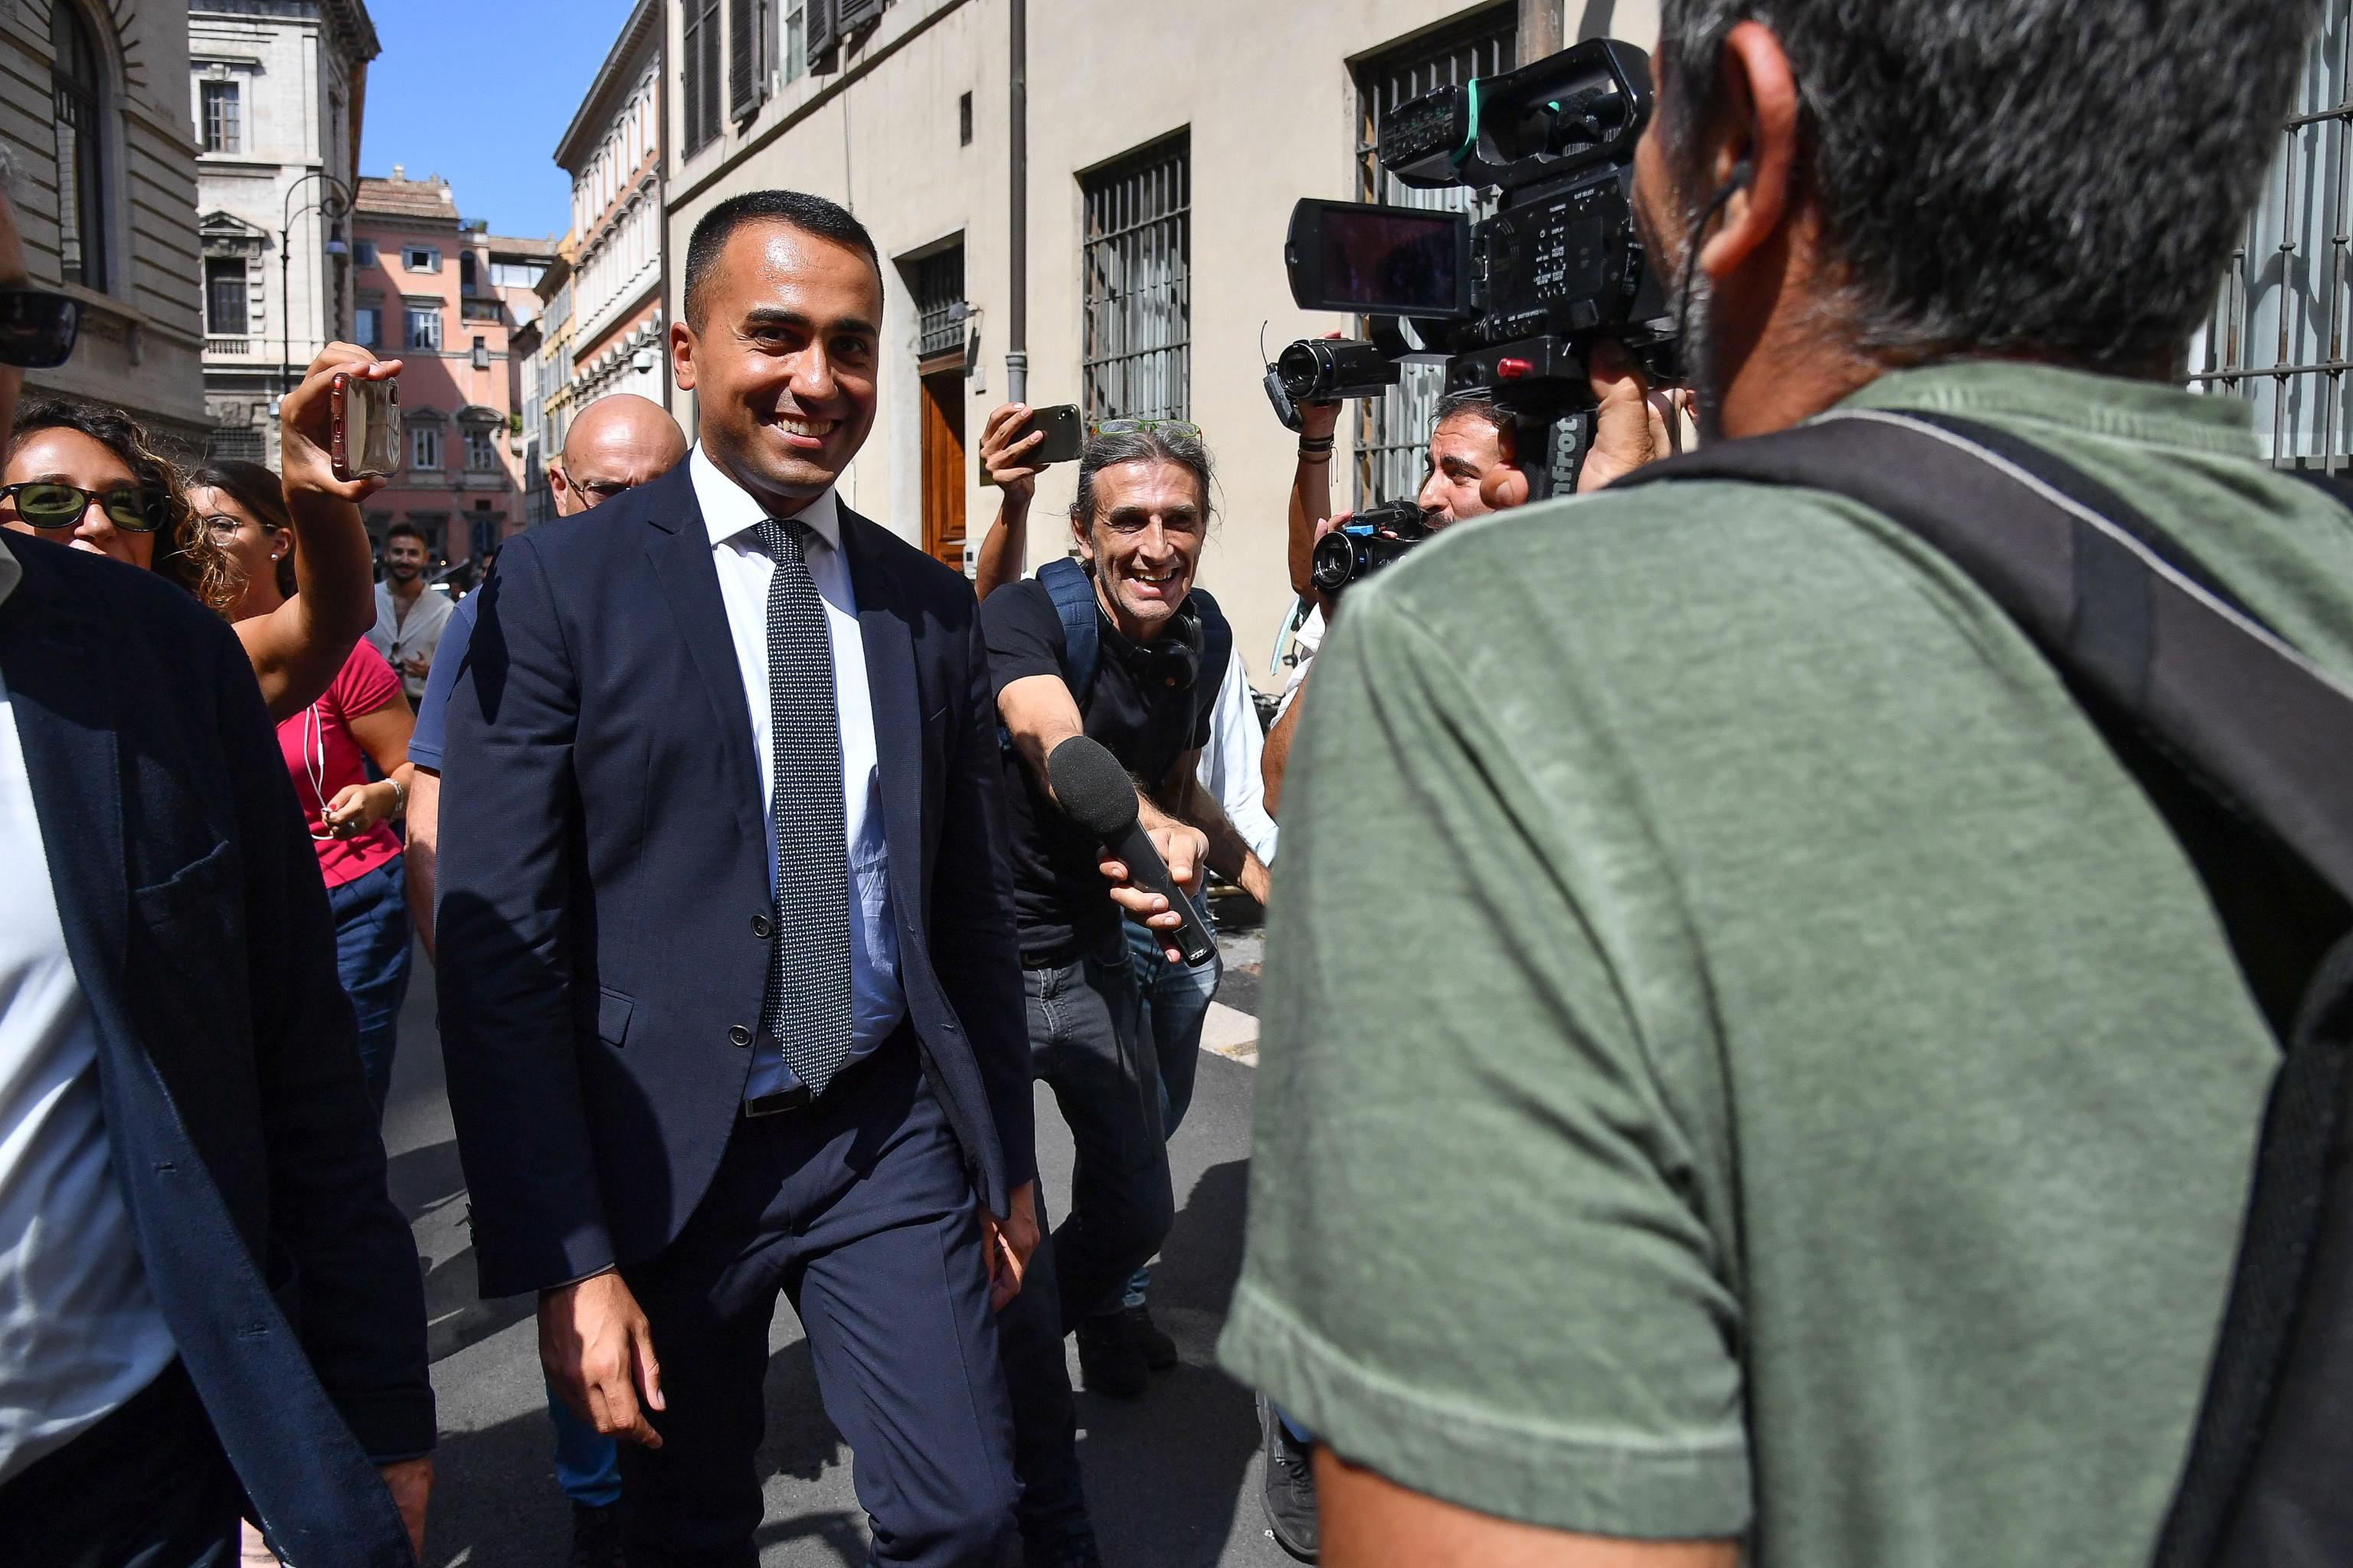 epa07814638 M5S (Five Star Movement) leader Luigi Di Maio returns to Chigi Palace after having lunch, in Rome, Italy, 03 September 2019. An online vote of grass-roots members of the anti-establishment 5-Star Movement (M5S) to ratify a possible government alliance with the centre-left Democratic Party (PD) got under way at nine o'clock Tuesday morning. Voting on the Rousseau platform will be open until six o'clock this evening. If the vote is positive then premier-designate Giuseppe Conte, also outgoing premier, will probably return to President Sergio Mattarella and say he will go ahead on the M5S-PD government-formation bid.
ANSA/ALESSANDRO DI MEO  EPA/ALESSANDRO DI MEO